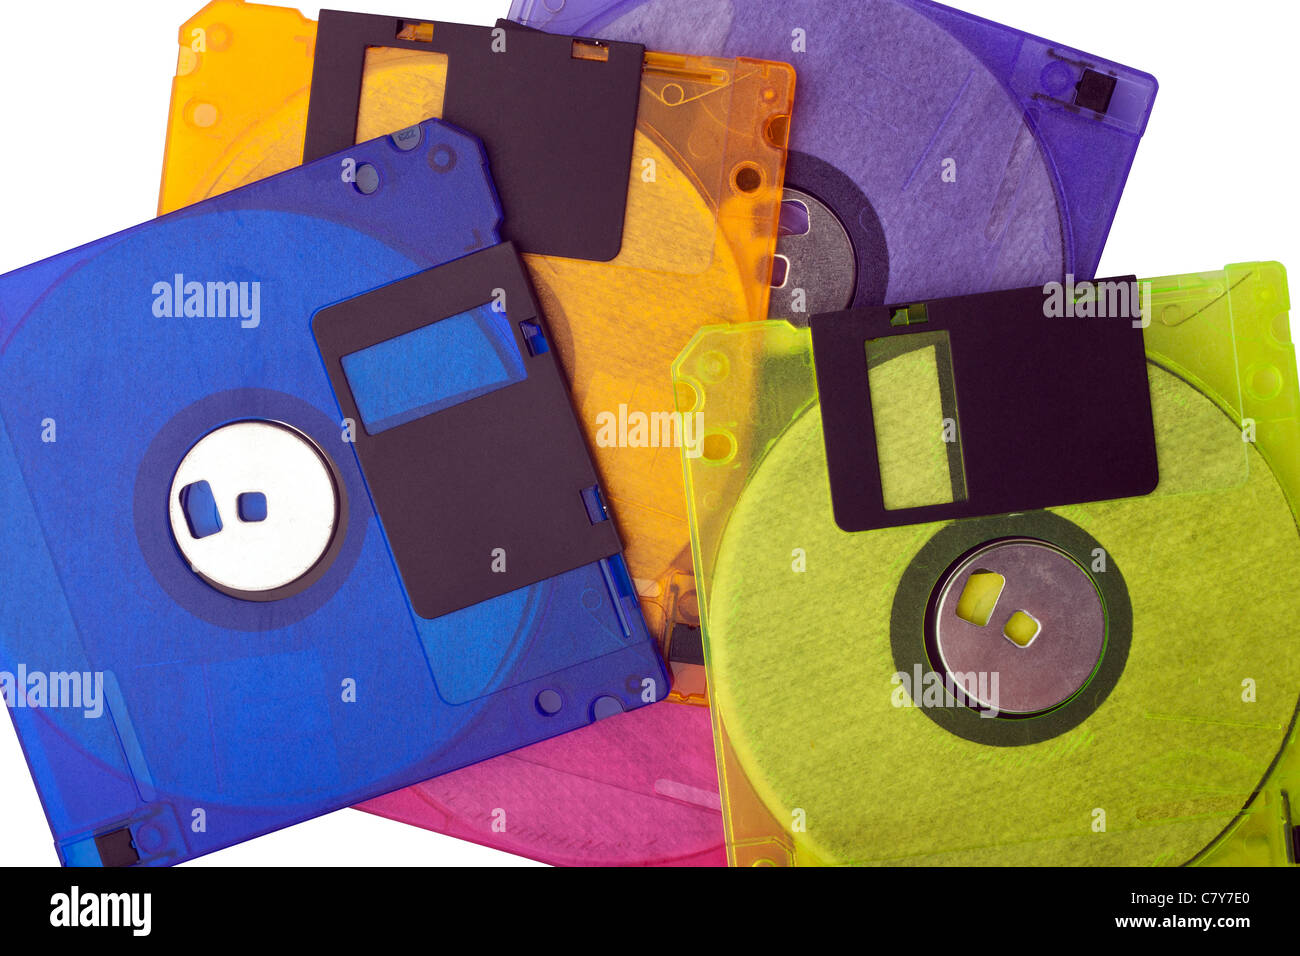 Multicolored floppy disks scattered against white background Stock Photo